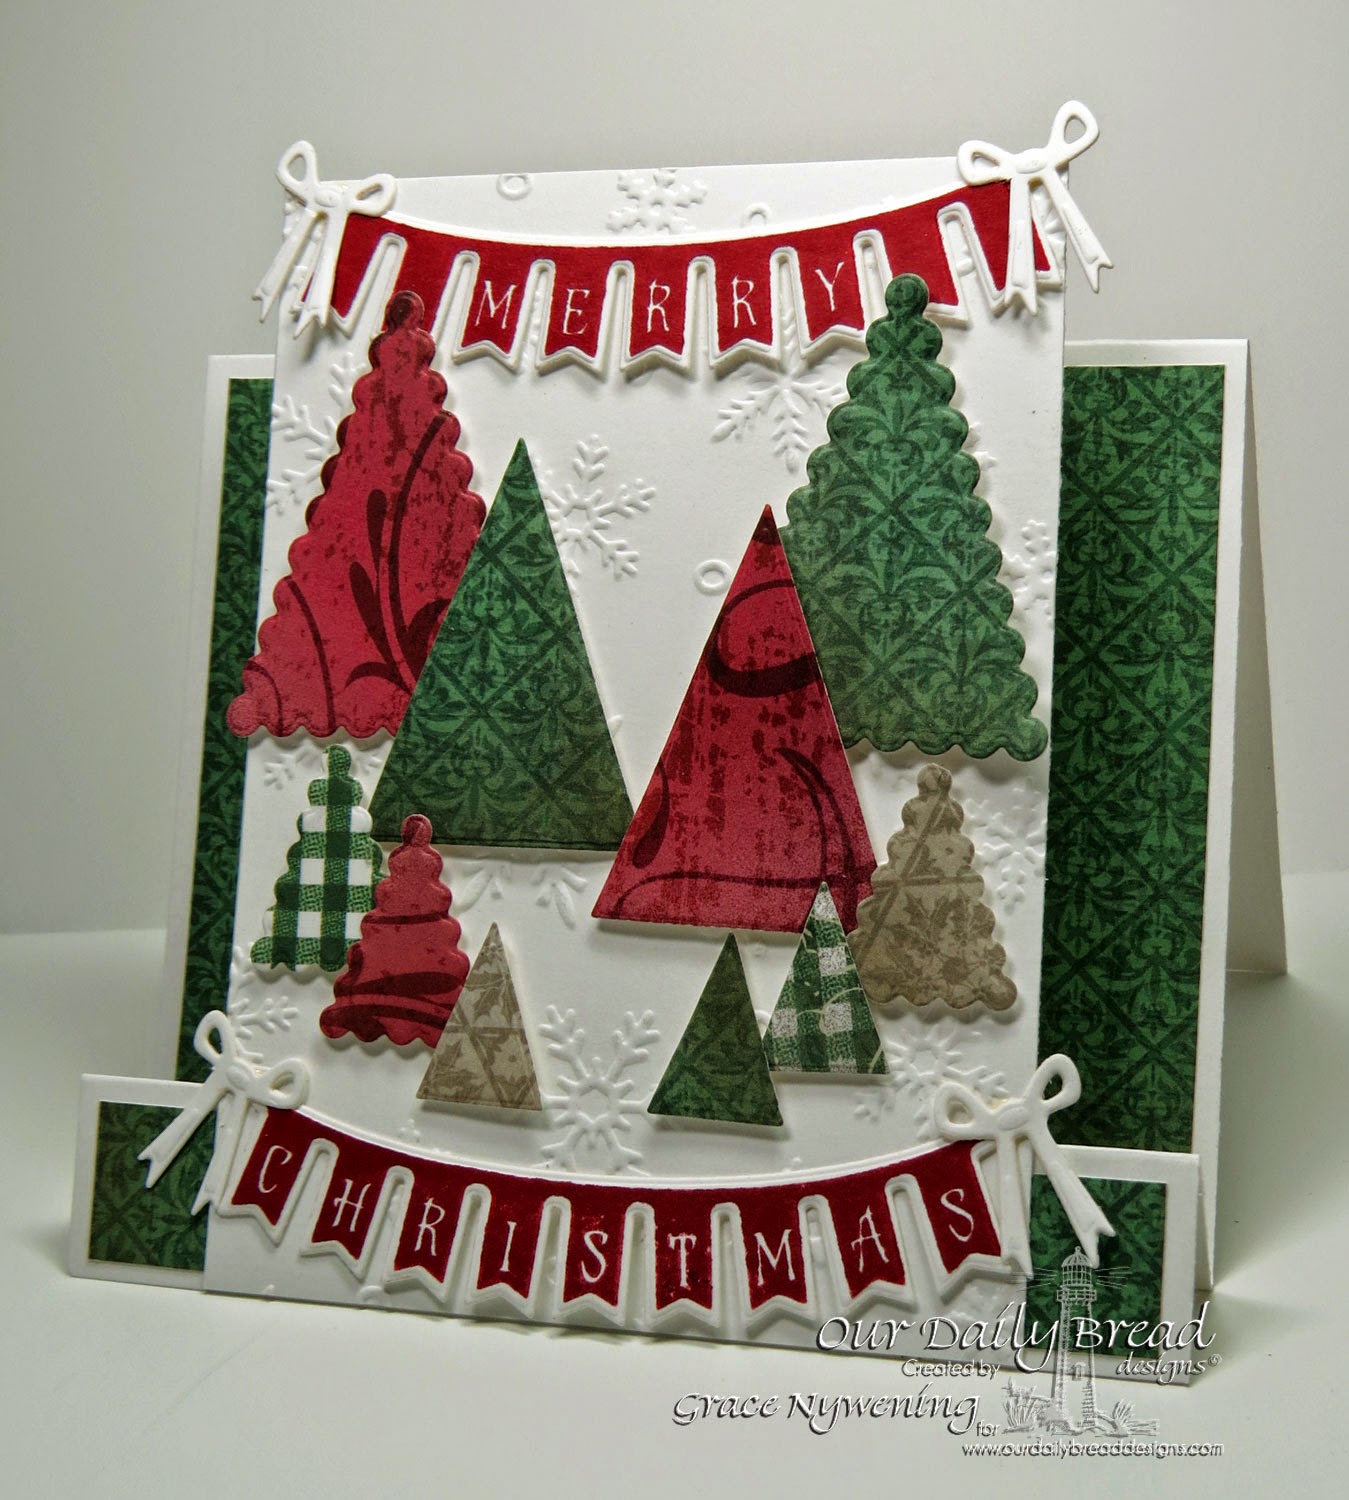 ODBD stamps: Christmas Pennant Swag, designed by Grace Nywening